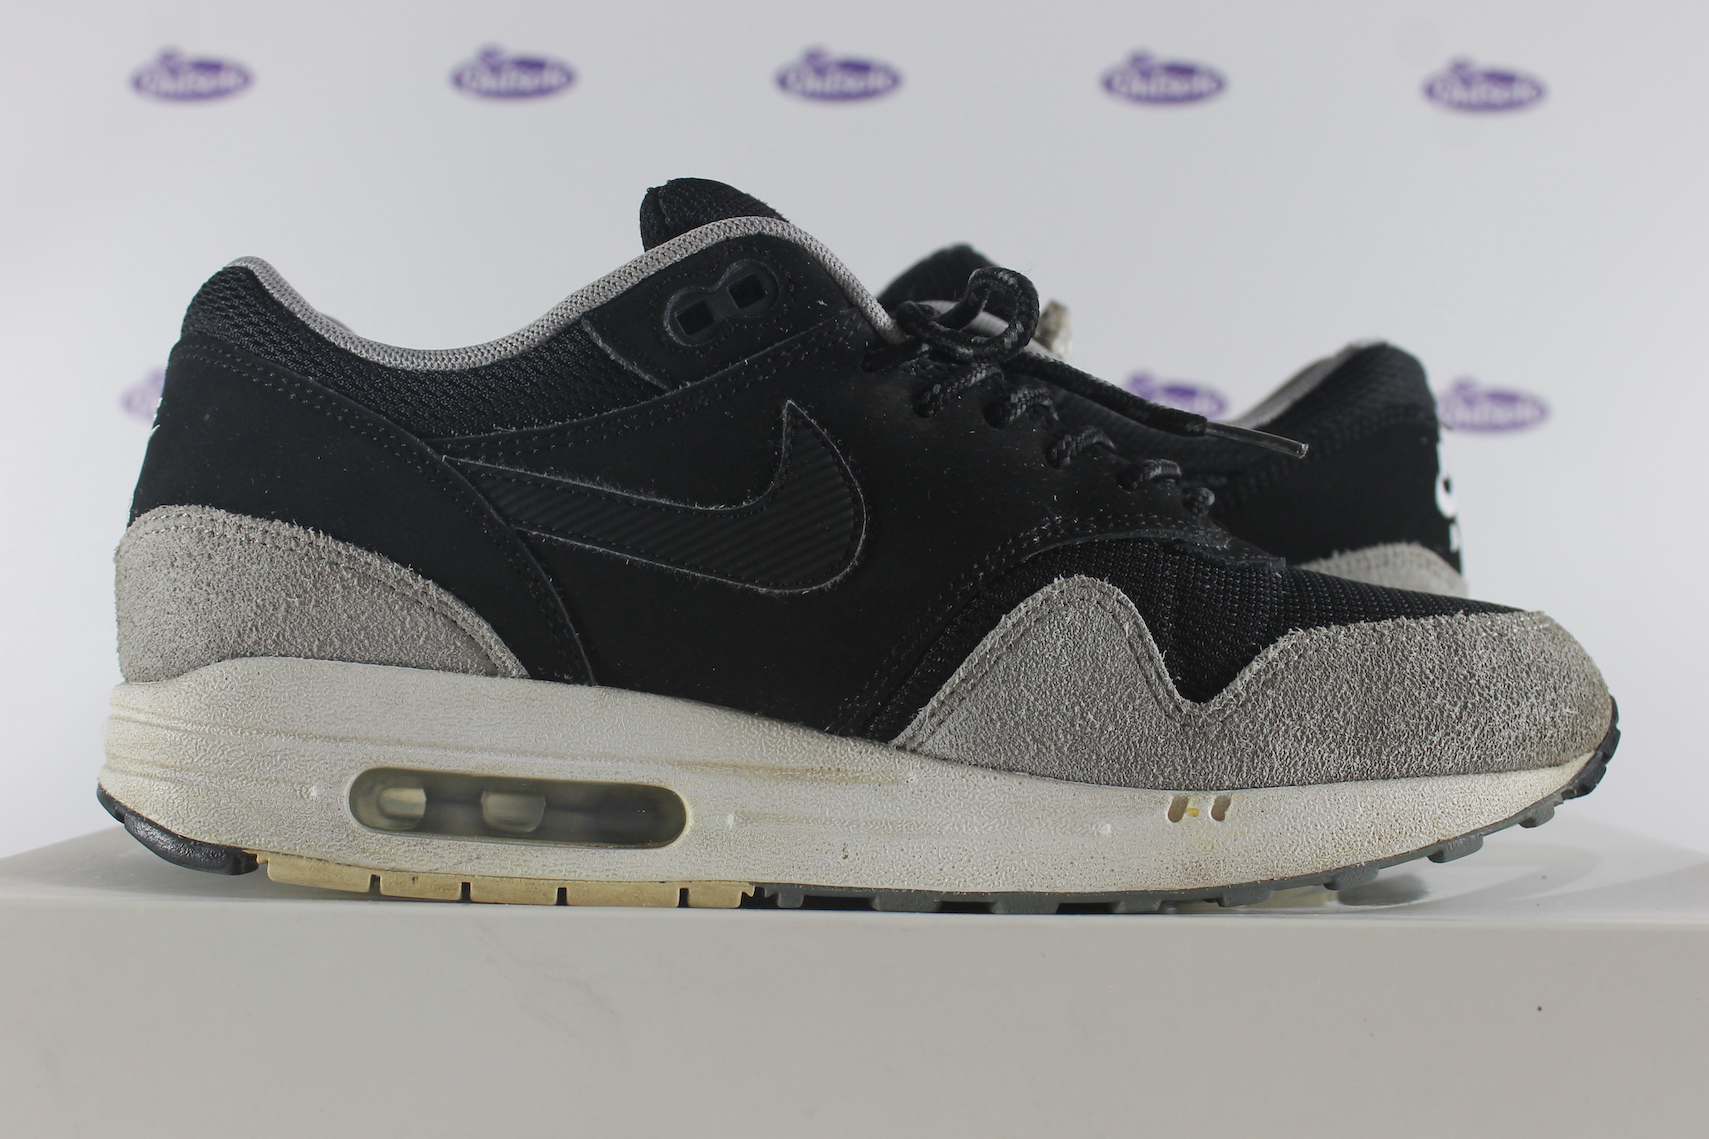 Nike Air Max 1 Essential Grey Suede ✓ In stock at Outsole